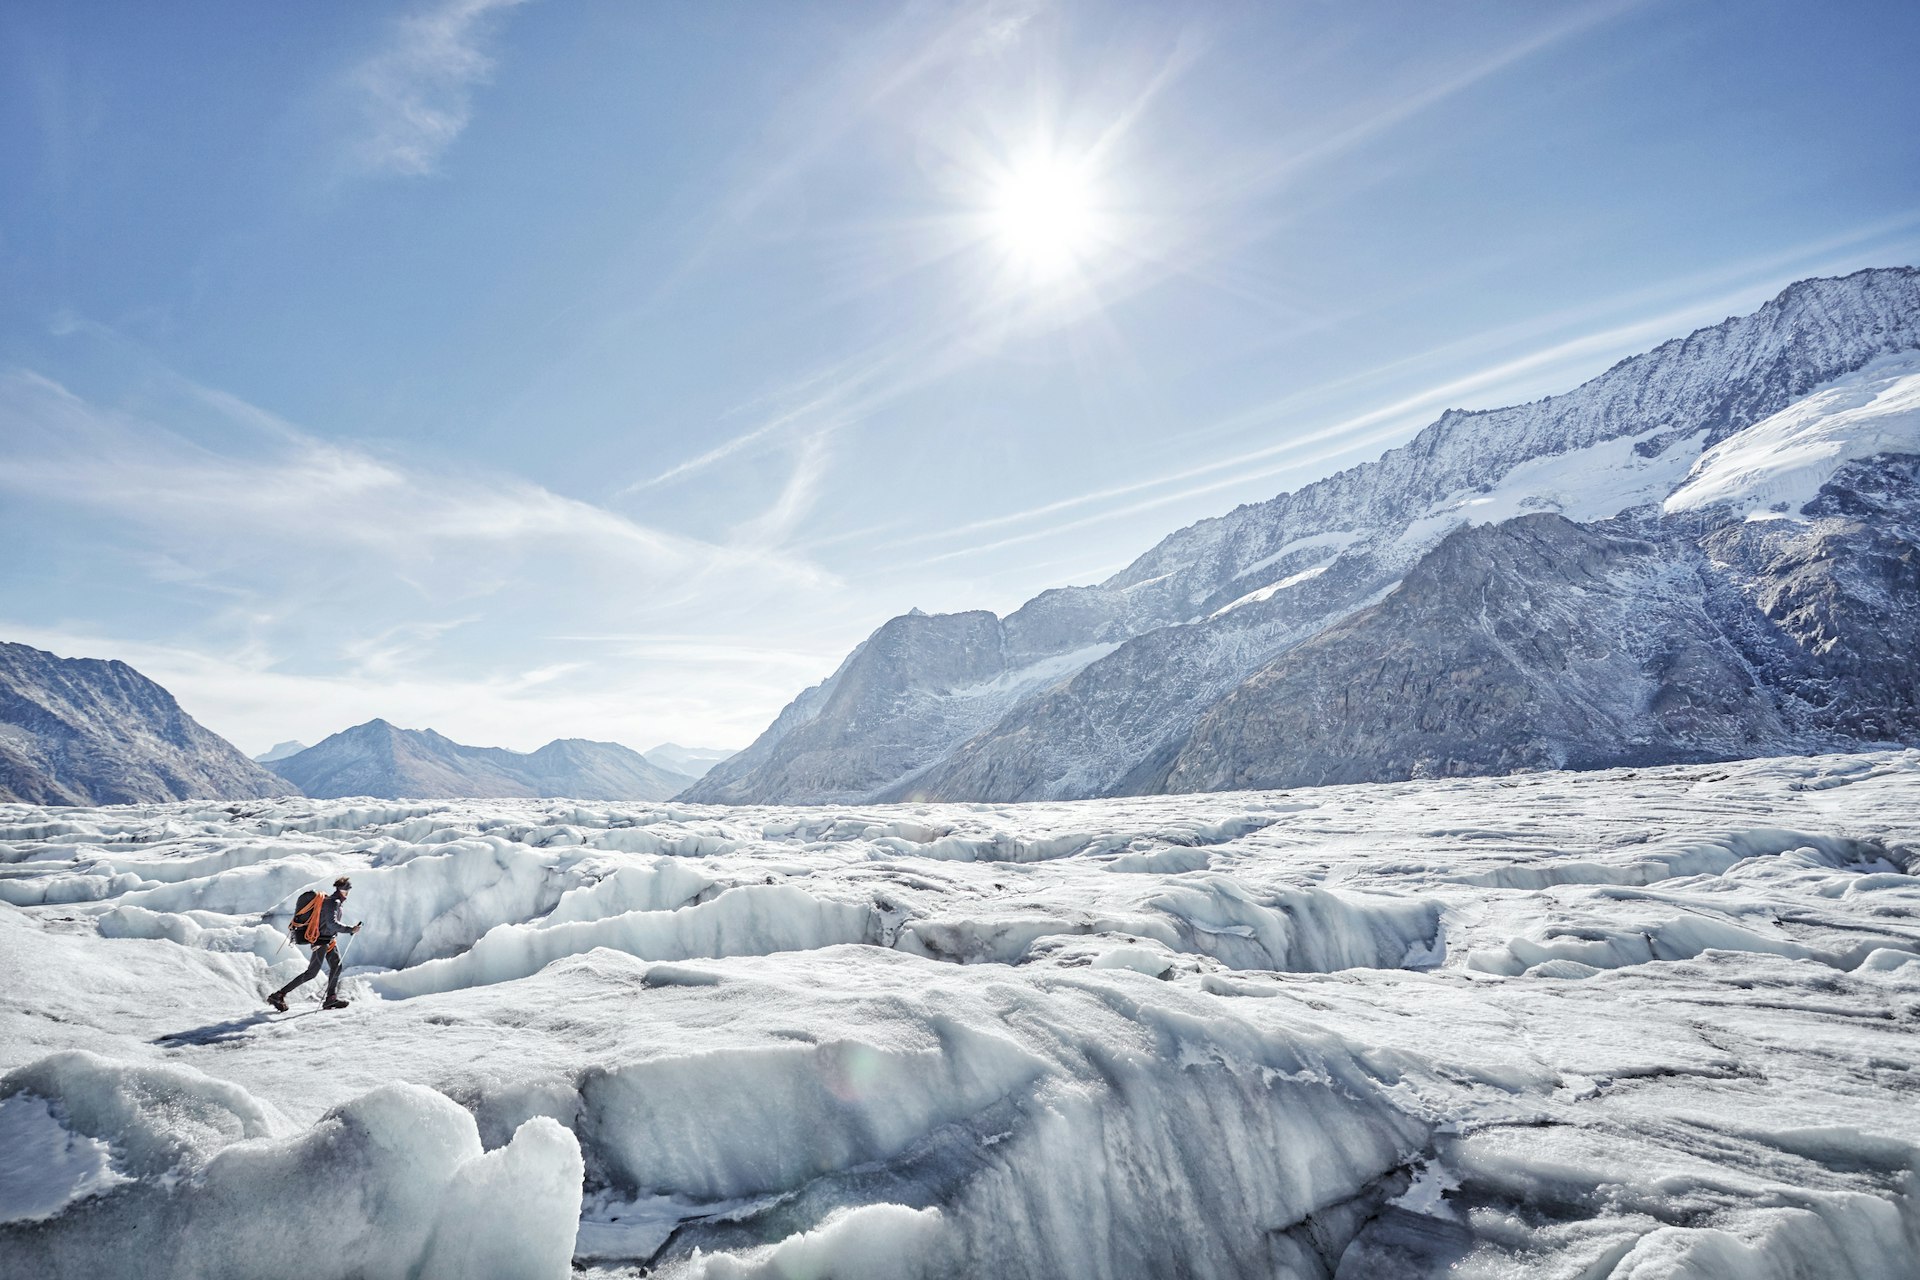 A person hikes on a vast glacier as the sun shines down